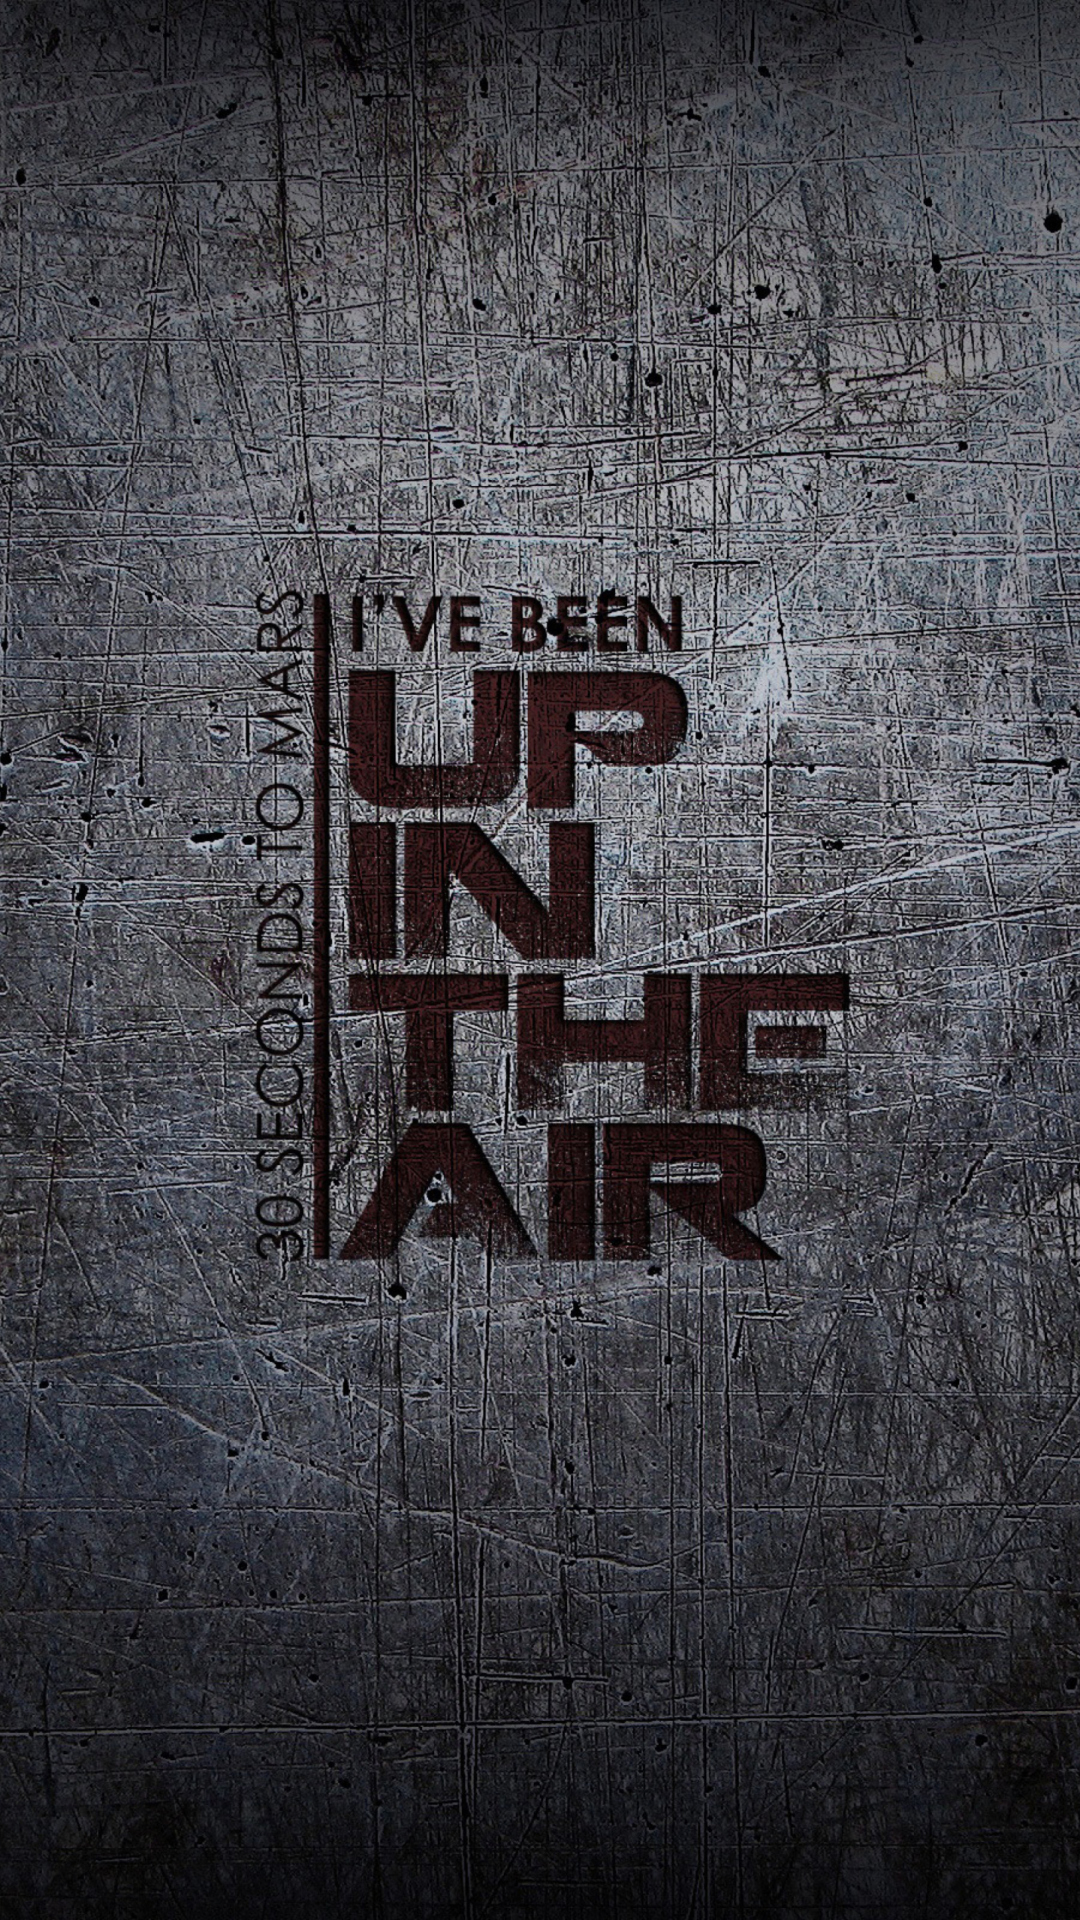 30 Seconds To Mars - Up In The Air screenshot #1 1080x1920